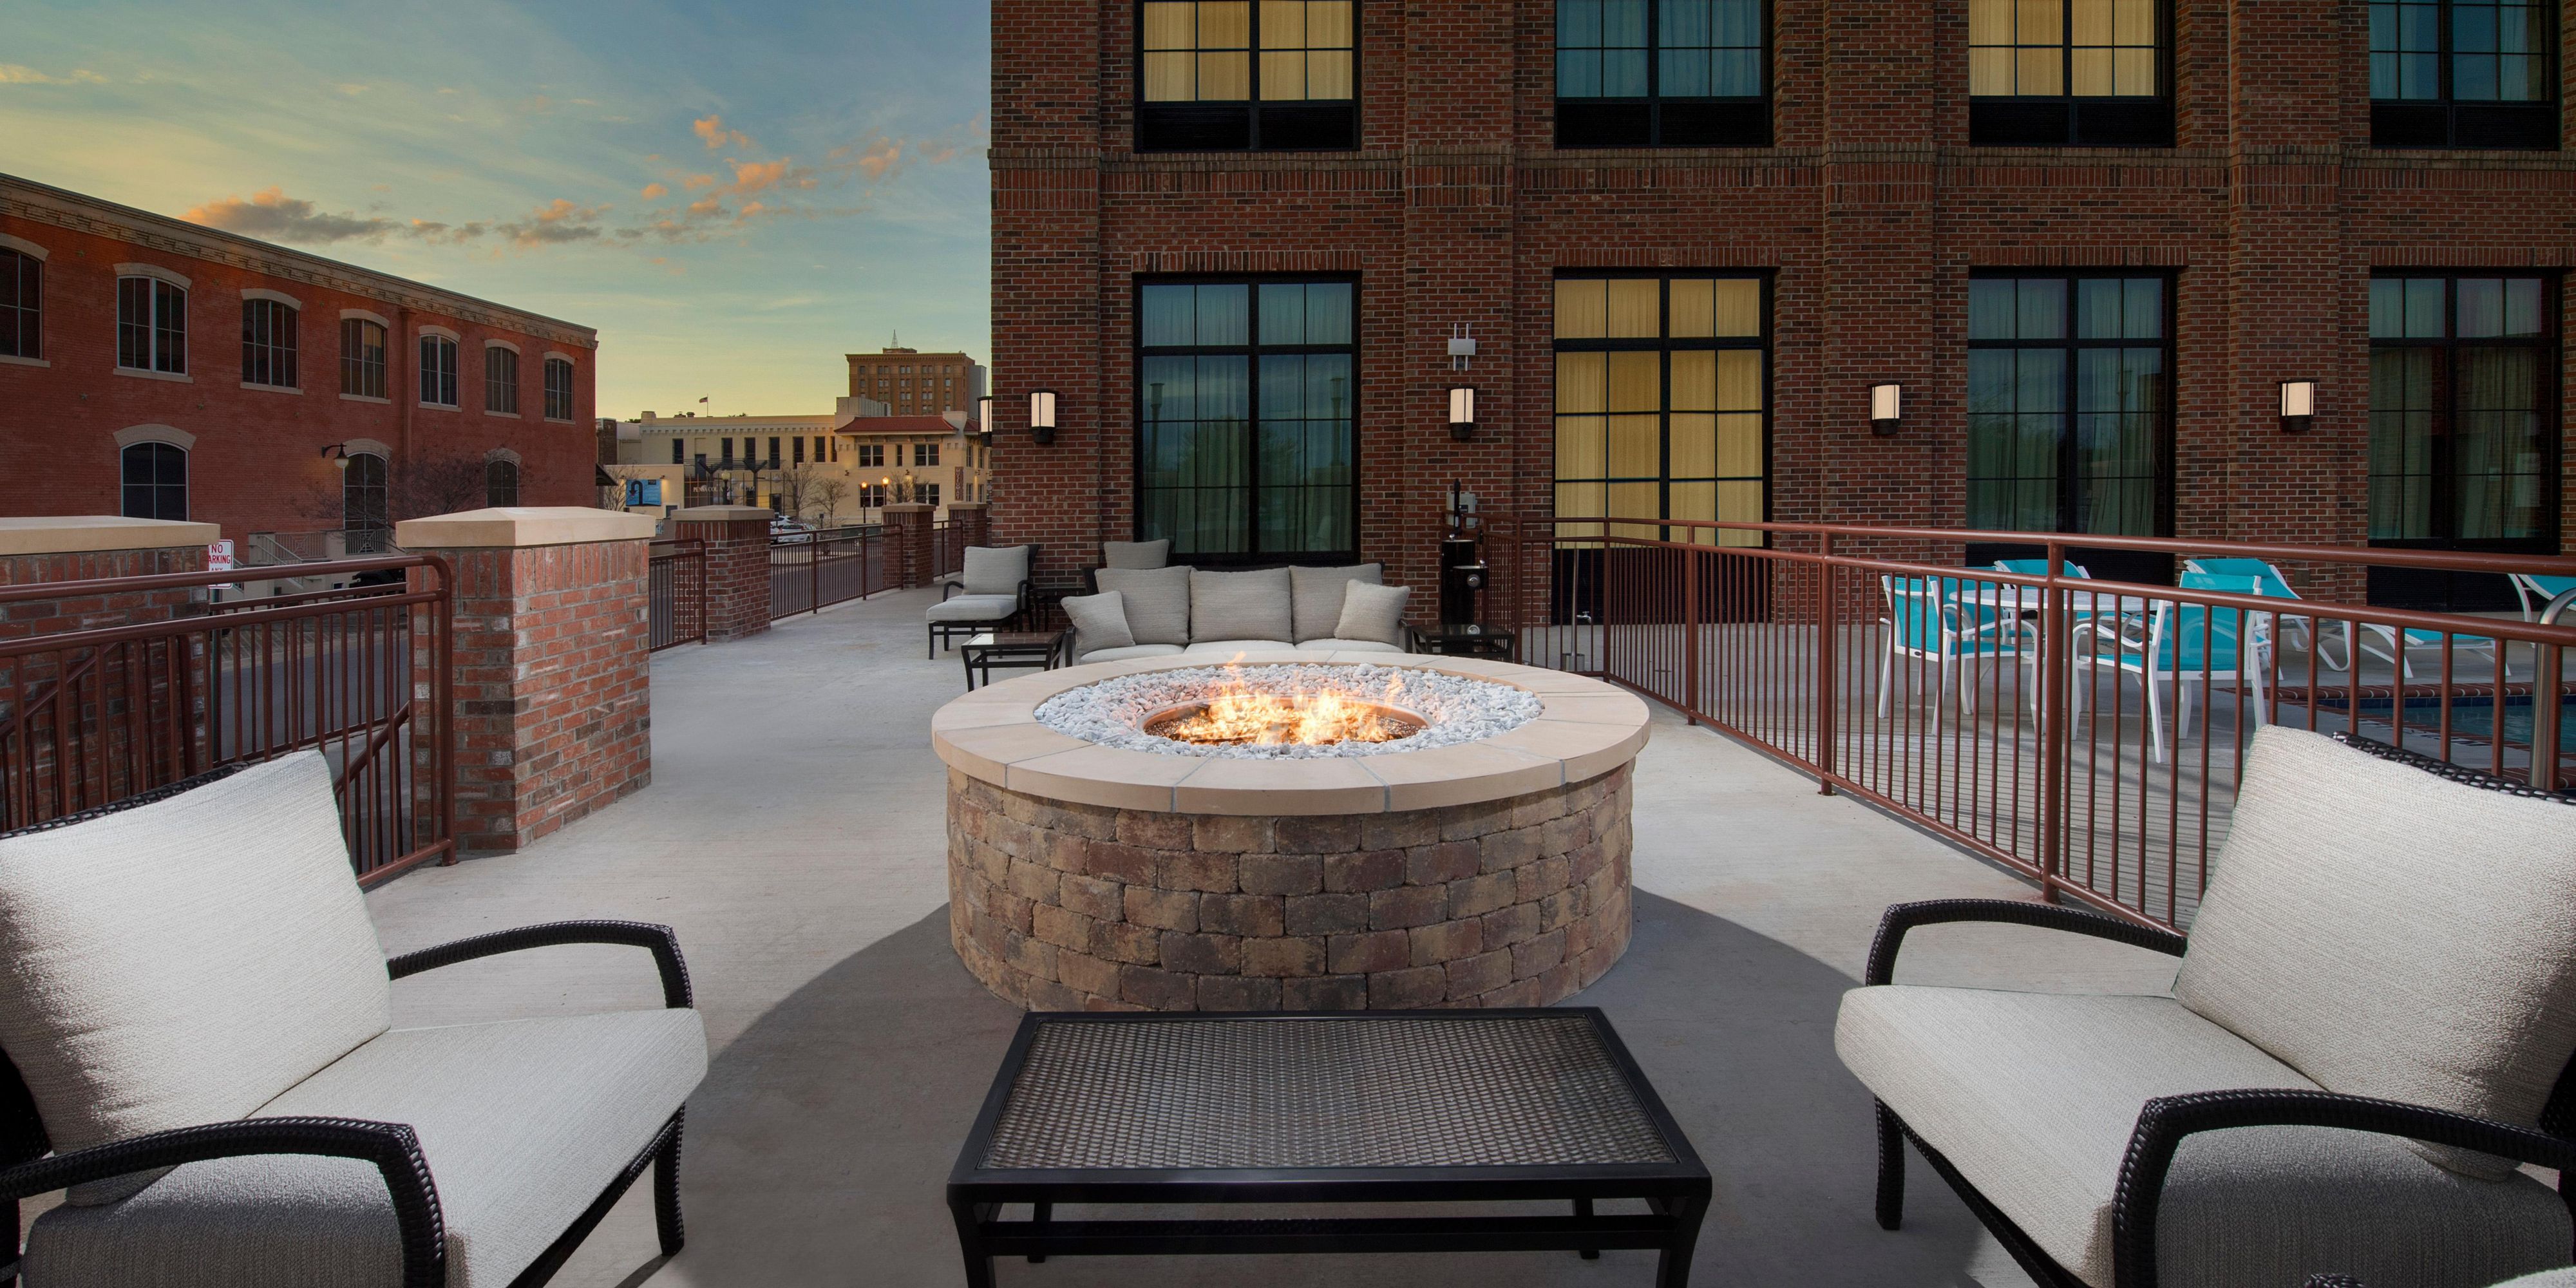 Relax and unwind by the fire pit while enjoying the night breeze from the gulf and harbor. As a Downtown hotel we are very conveniently located to local businesses, and we are within walking distance to the Ferry to Pensacola Beach.